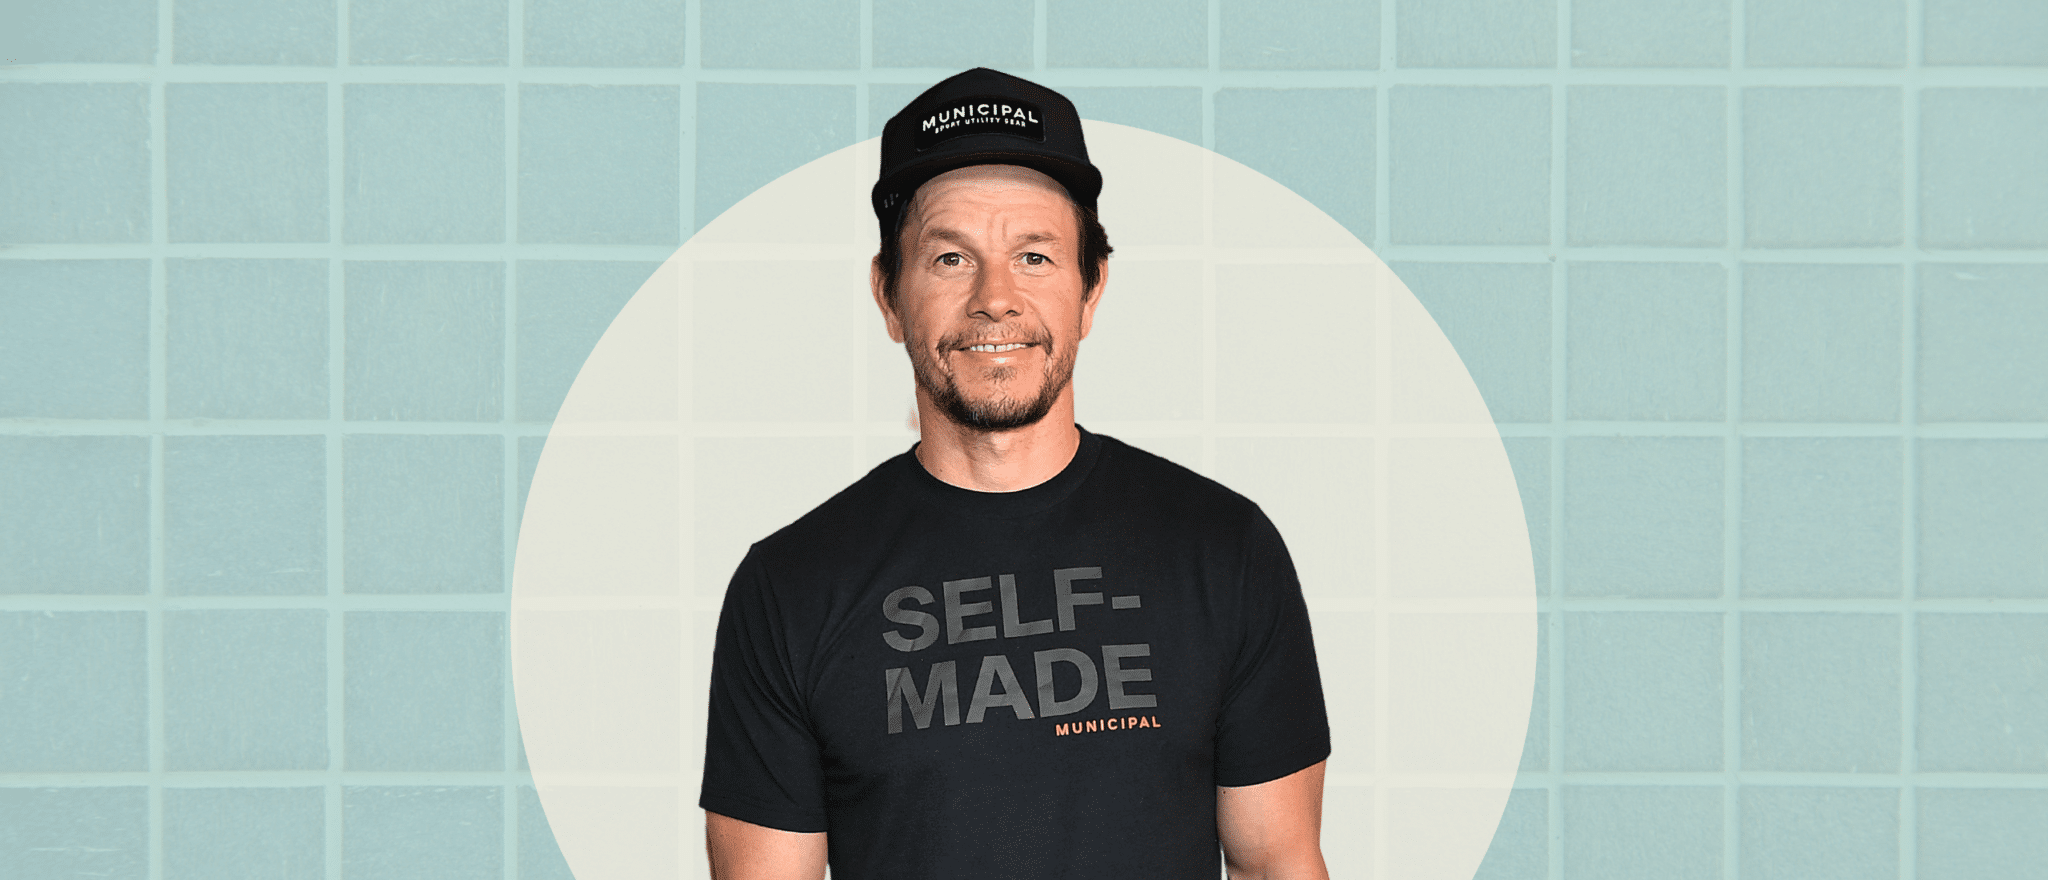 Mark Wahlberg Wakes Up at 4 a.m. to Workout. Should You?